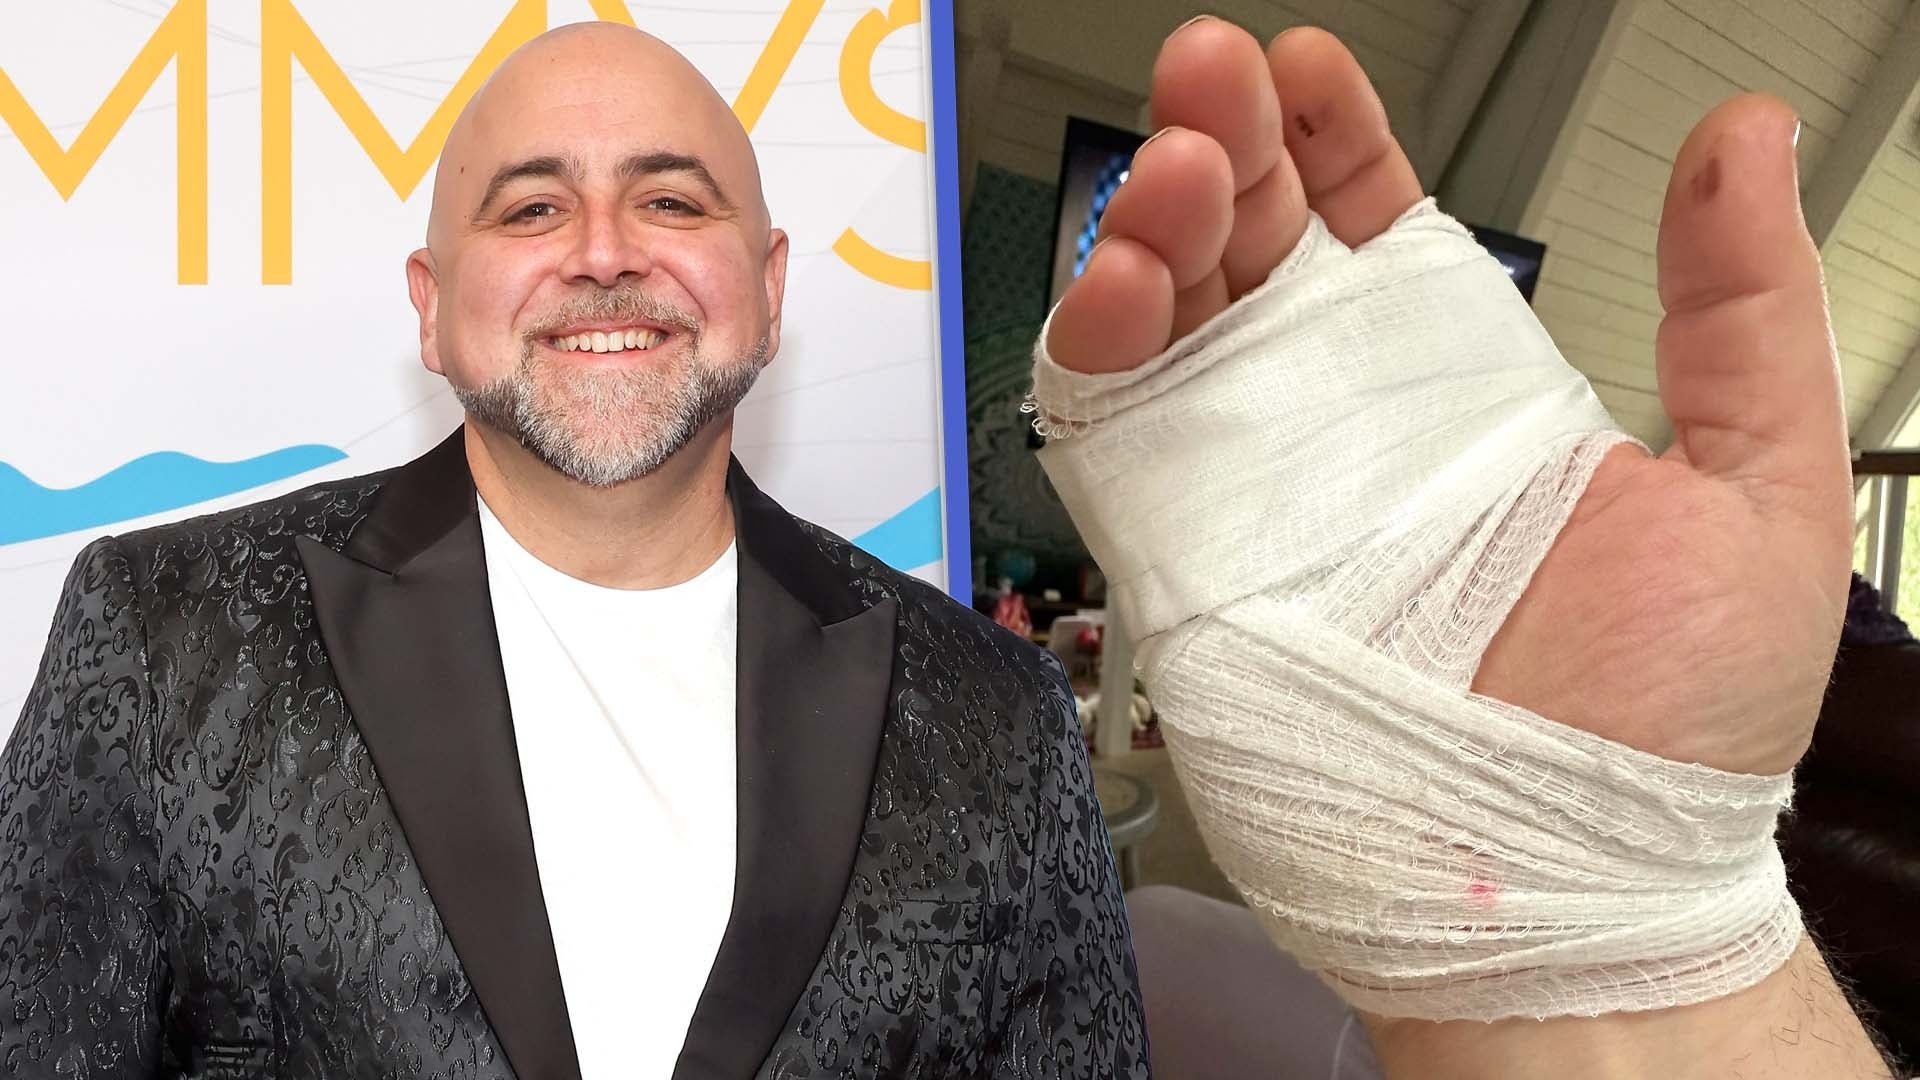 Food Network Star Duff Goldman Says a Drunk Driver Hit Him and Left Him With Injuries